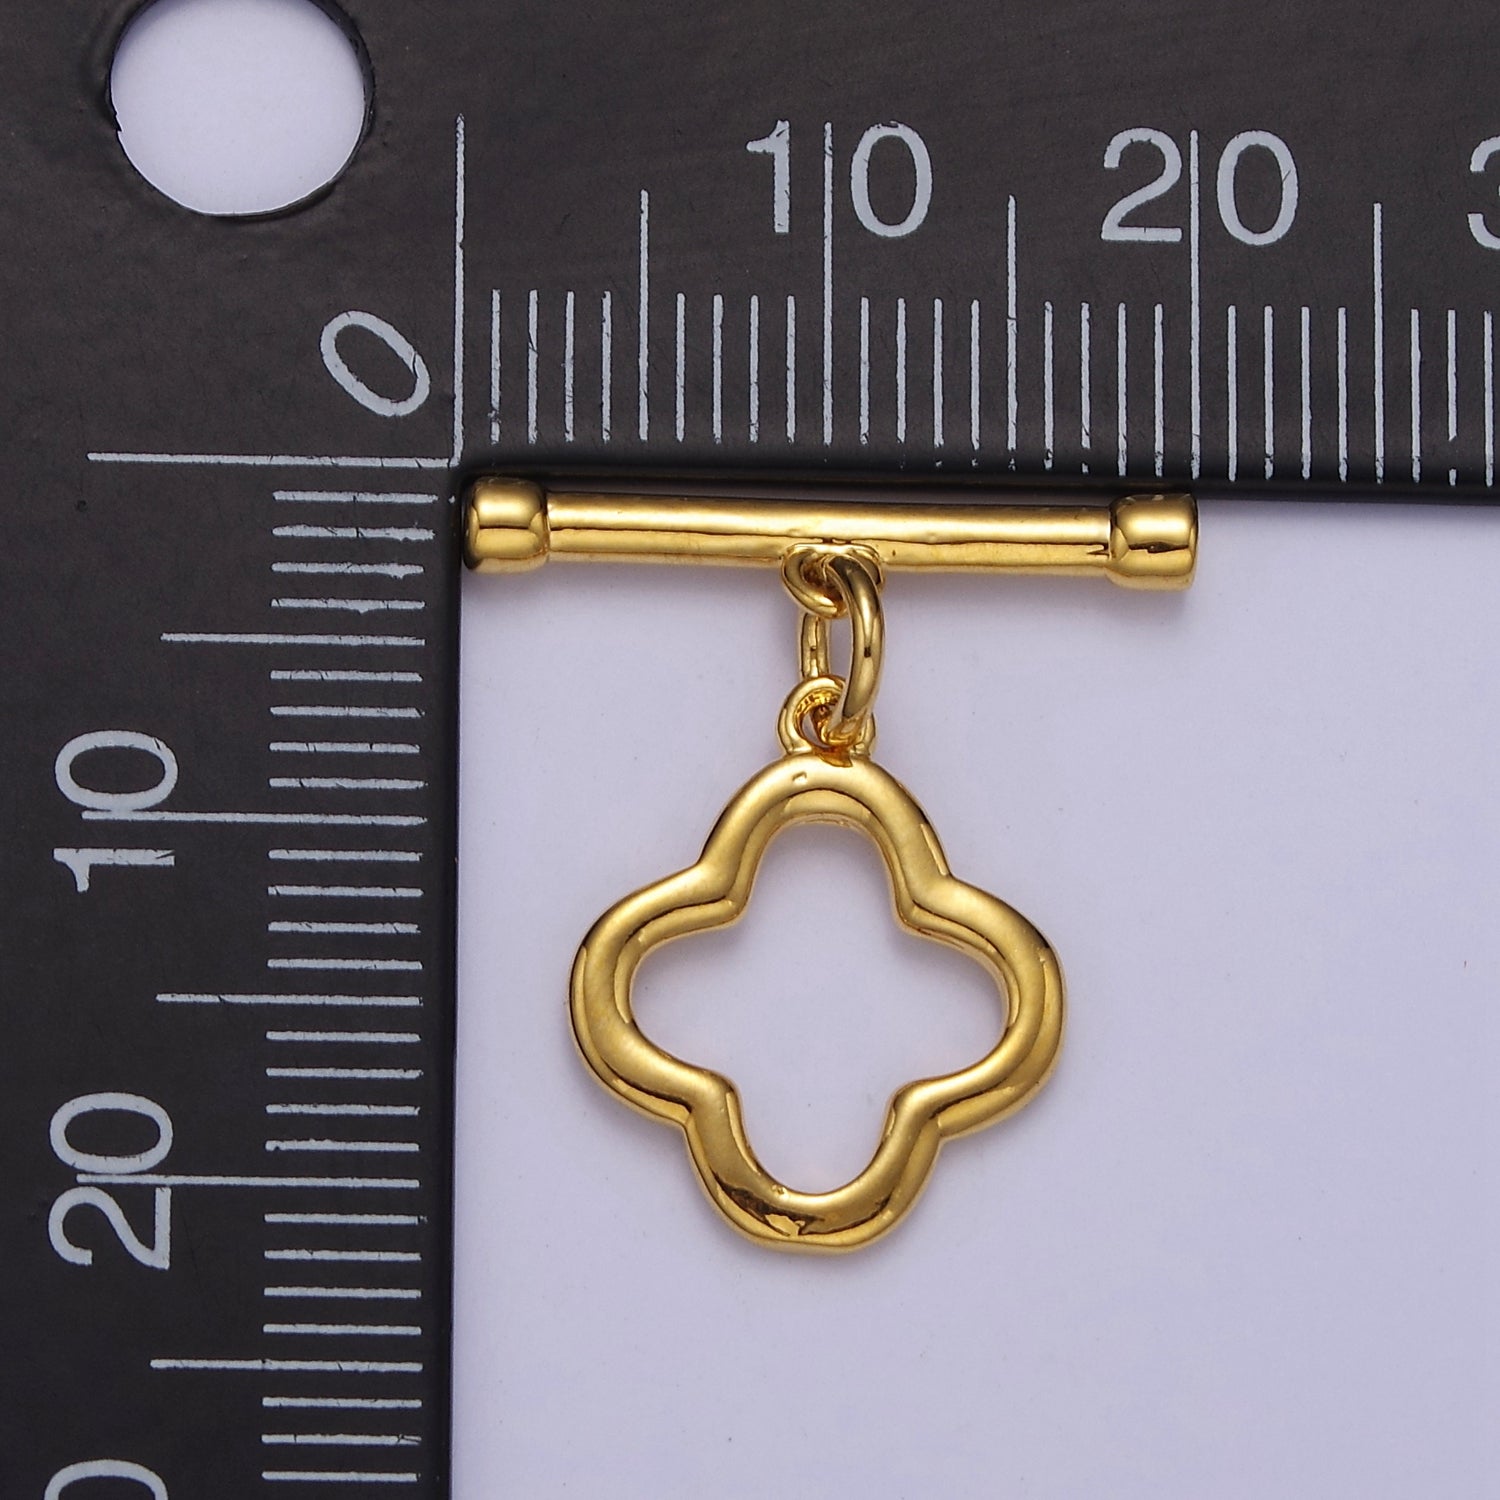 24k Gold Filled Flower Toggle Clasp, Jewelry Clasp OT Clasp Findings L-702 - DLUXCA